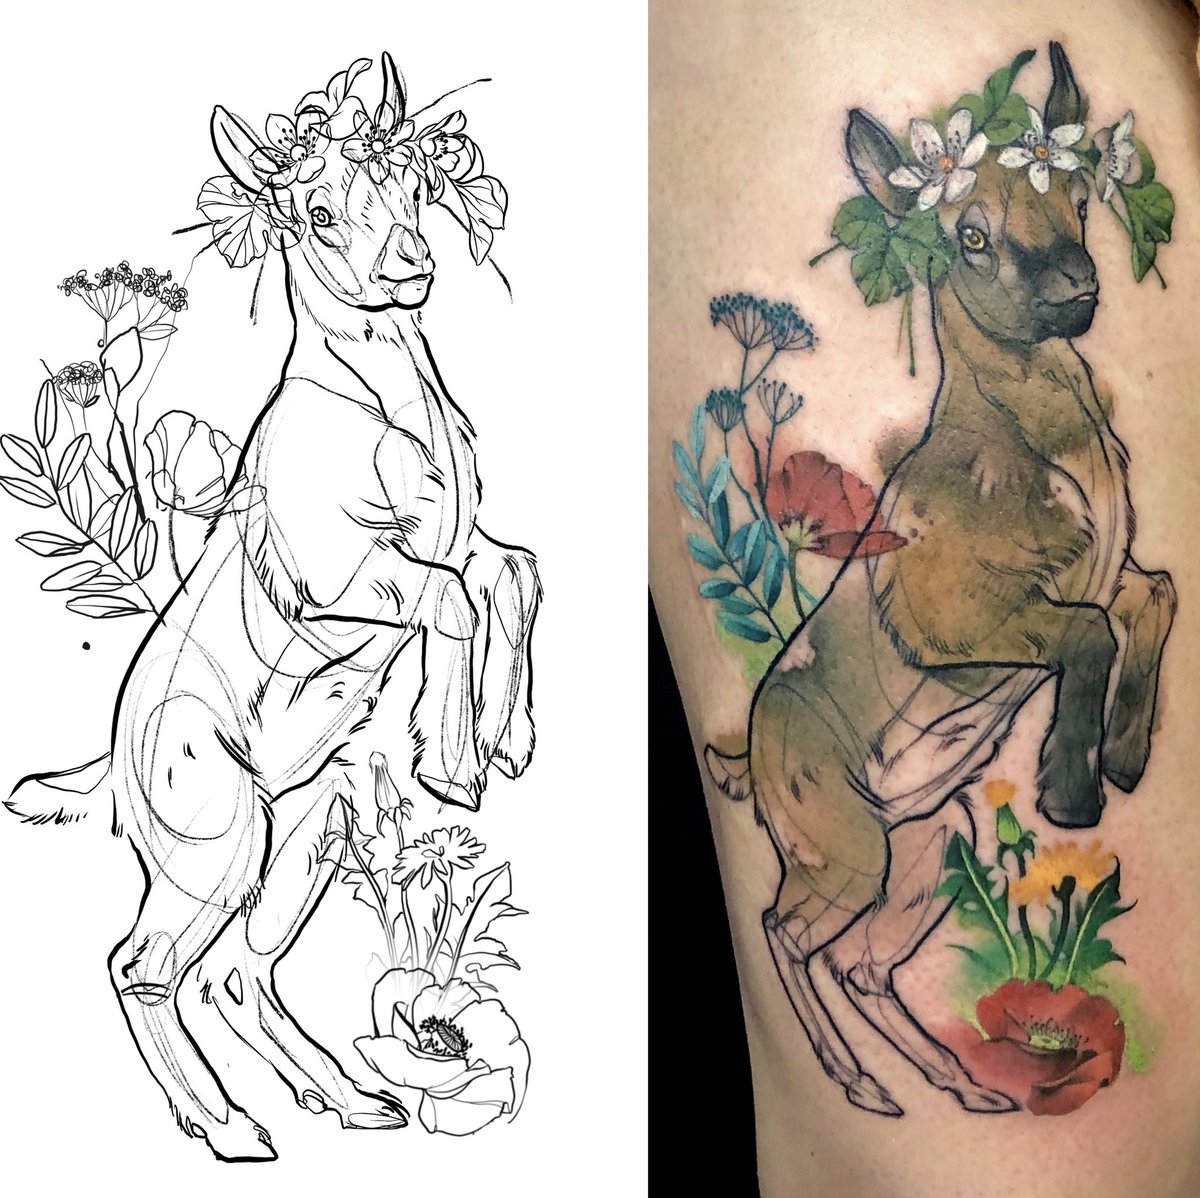 I’m exited to show you my tattoo process, from the #sketch to final #tattoo -I draw everyday and there’s plenty of never published #drawings which aren’t #tattooed eventually, so I thought it would be great to show them from time to time
#artist #design #tattoos #warsawtattoo